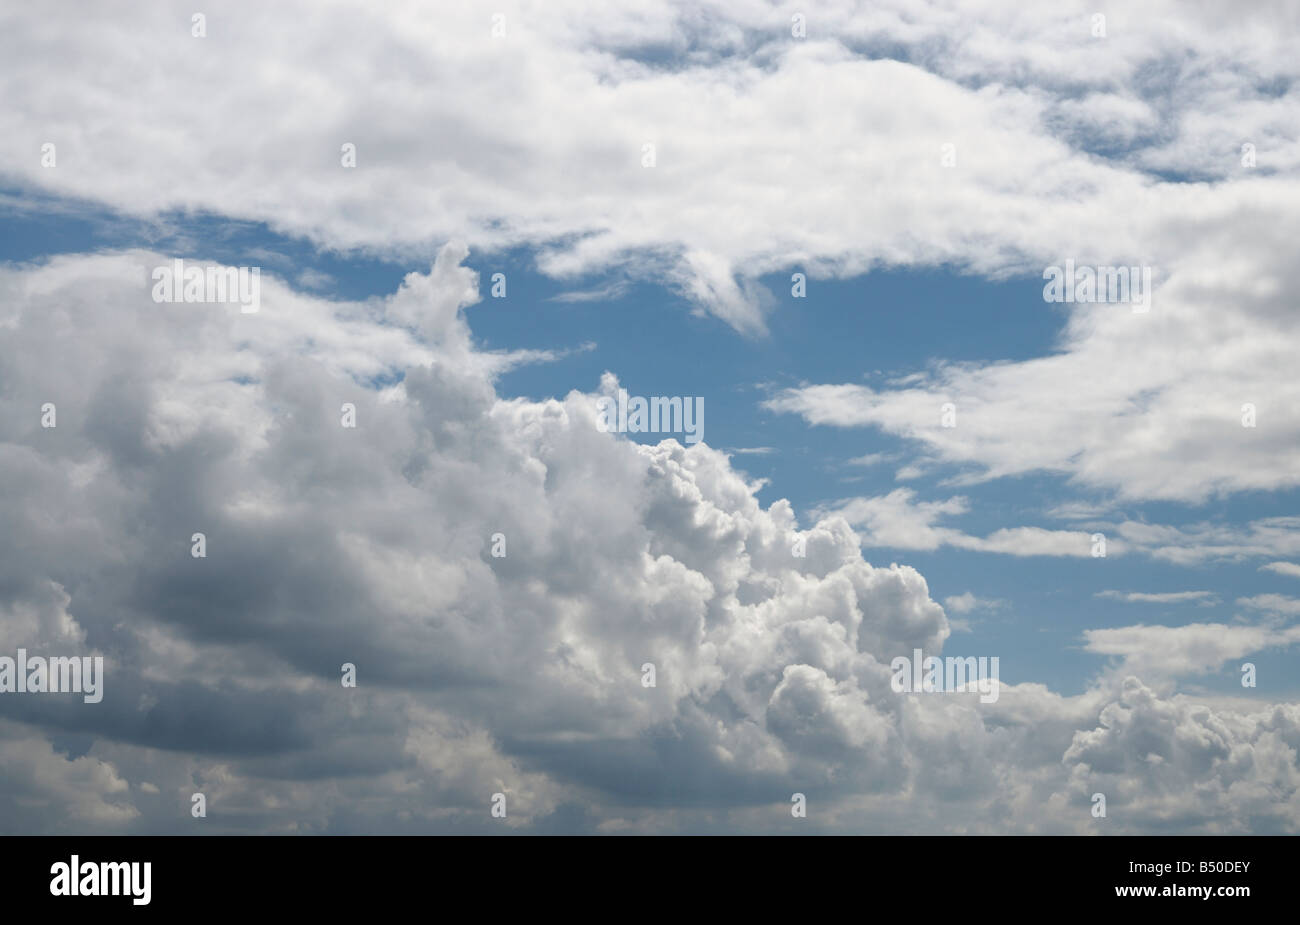 Cloudy but bright sky with some blue sky showing through Stock Photo